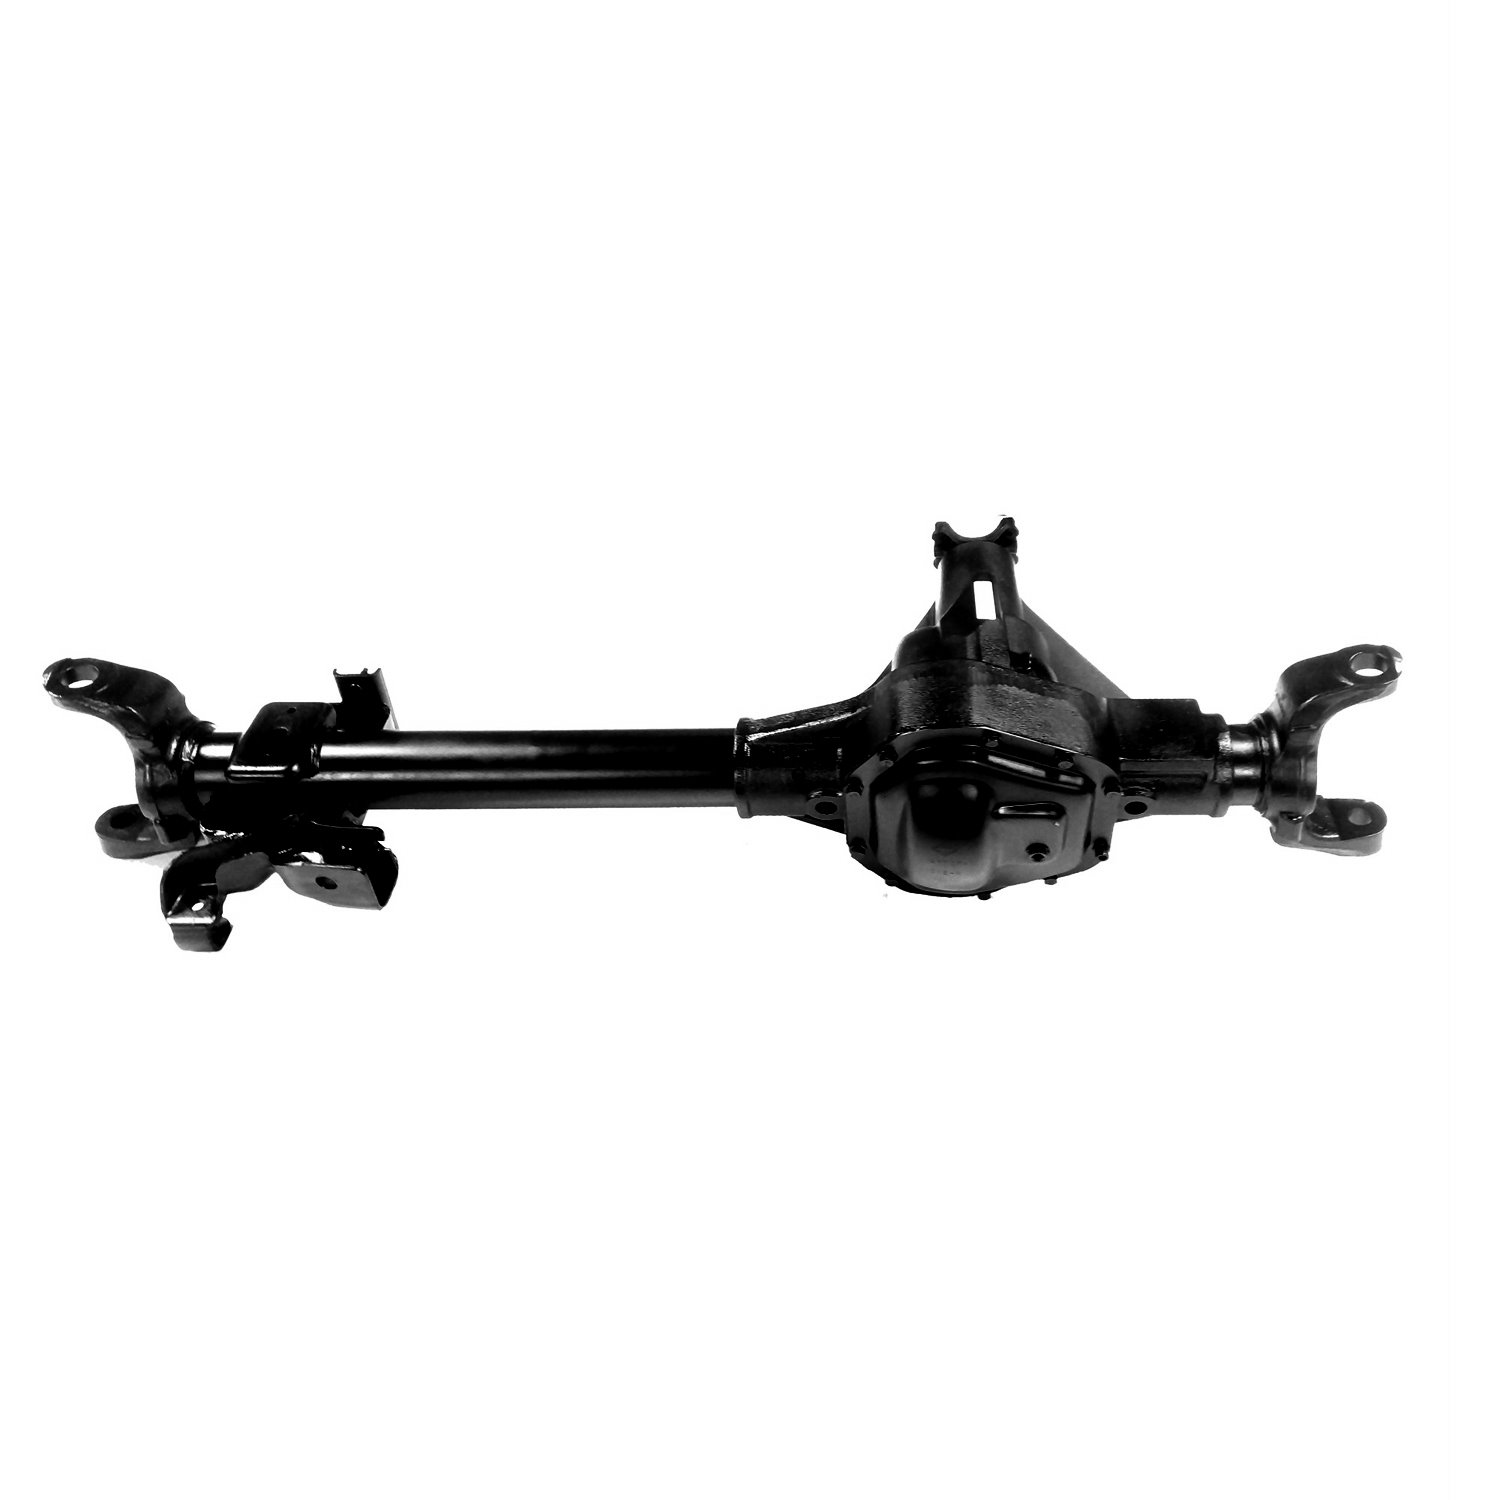 Remanufactured Complete Axle Assembly for Dana 60 11-12 Ford F350 4.30, SRW, Cab Chassis